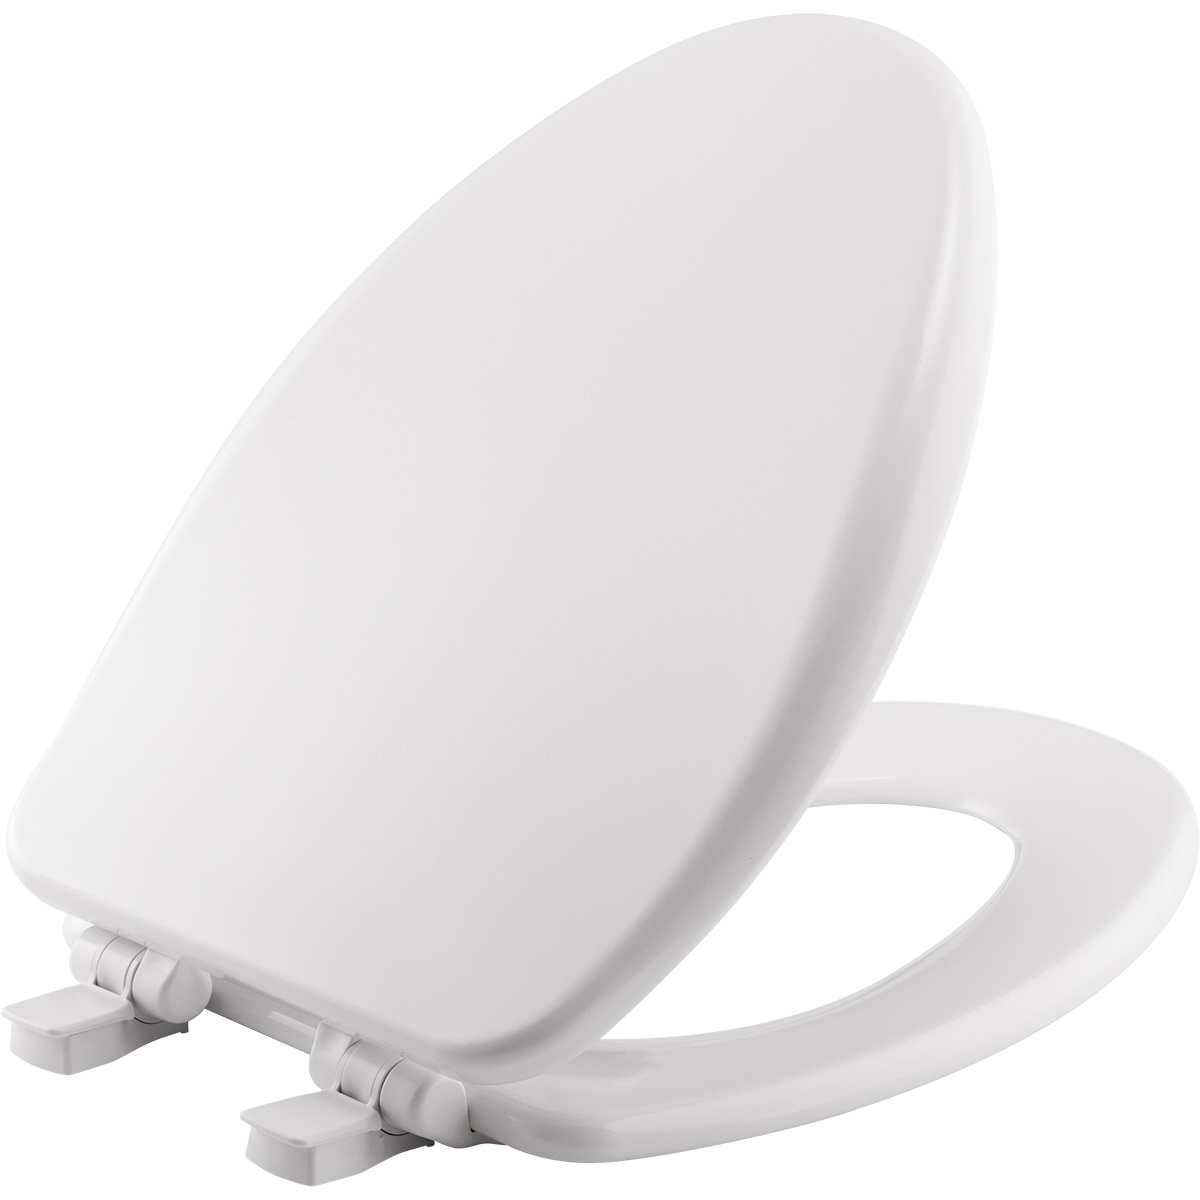 164SLOW 000 Toilet Seat, Elongated, Wood, White, Easy Clean and Change Hinge